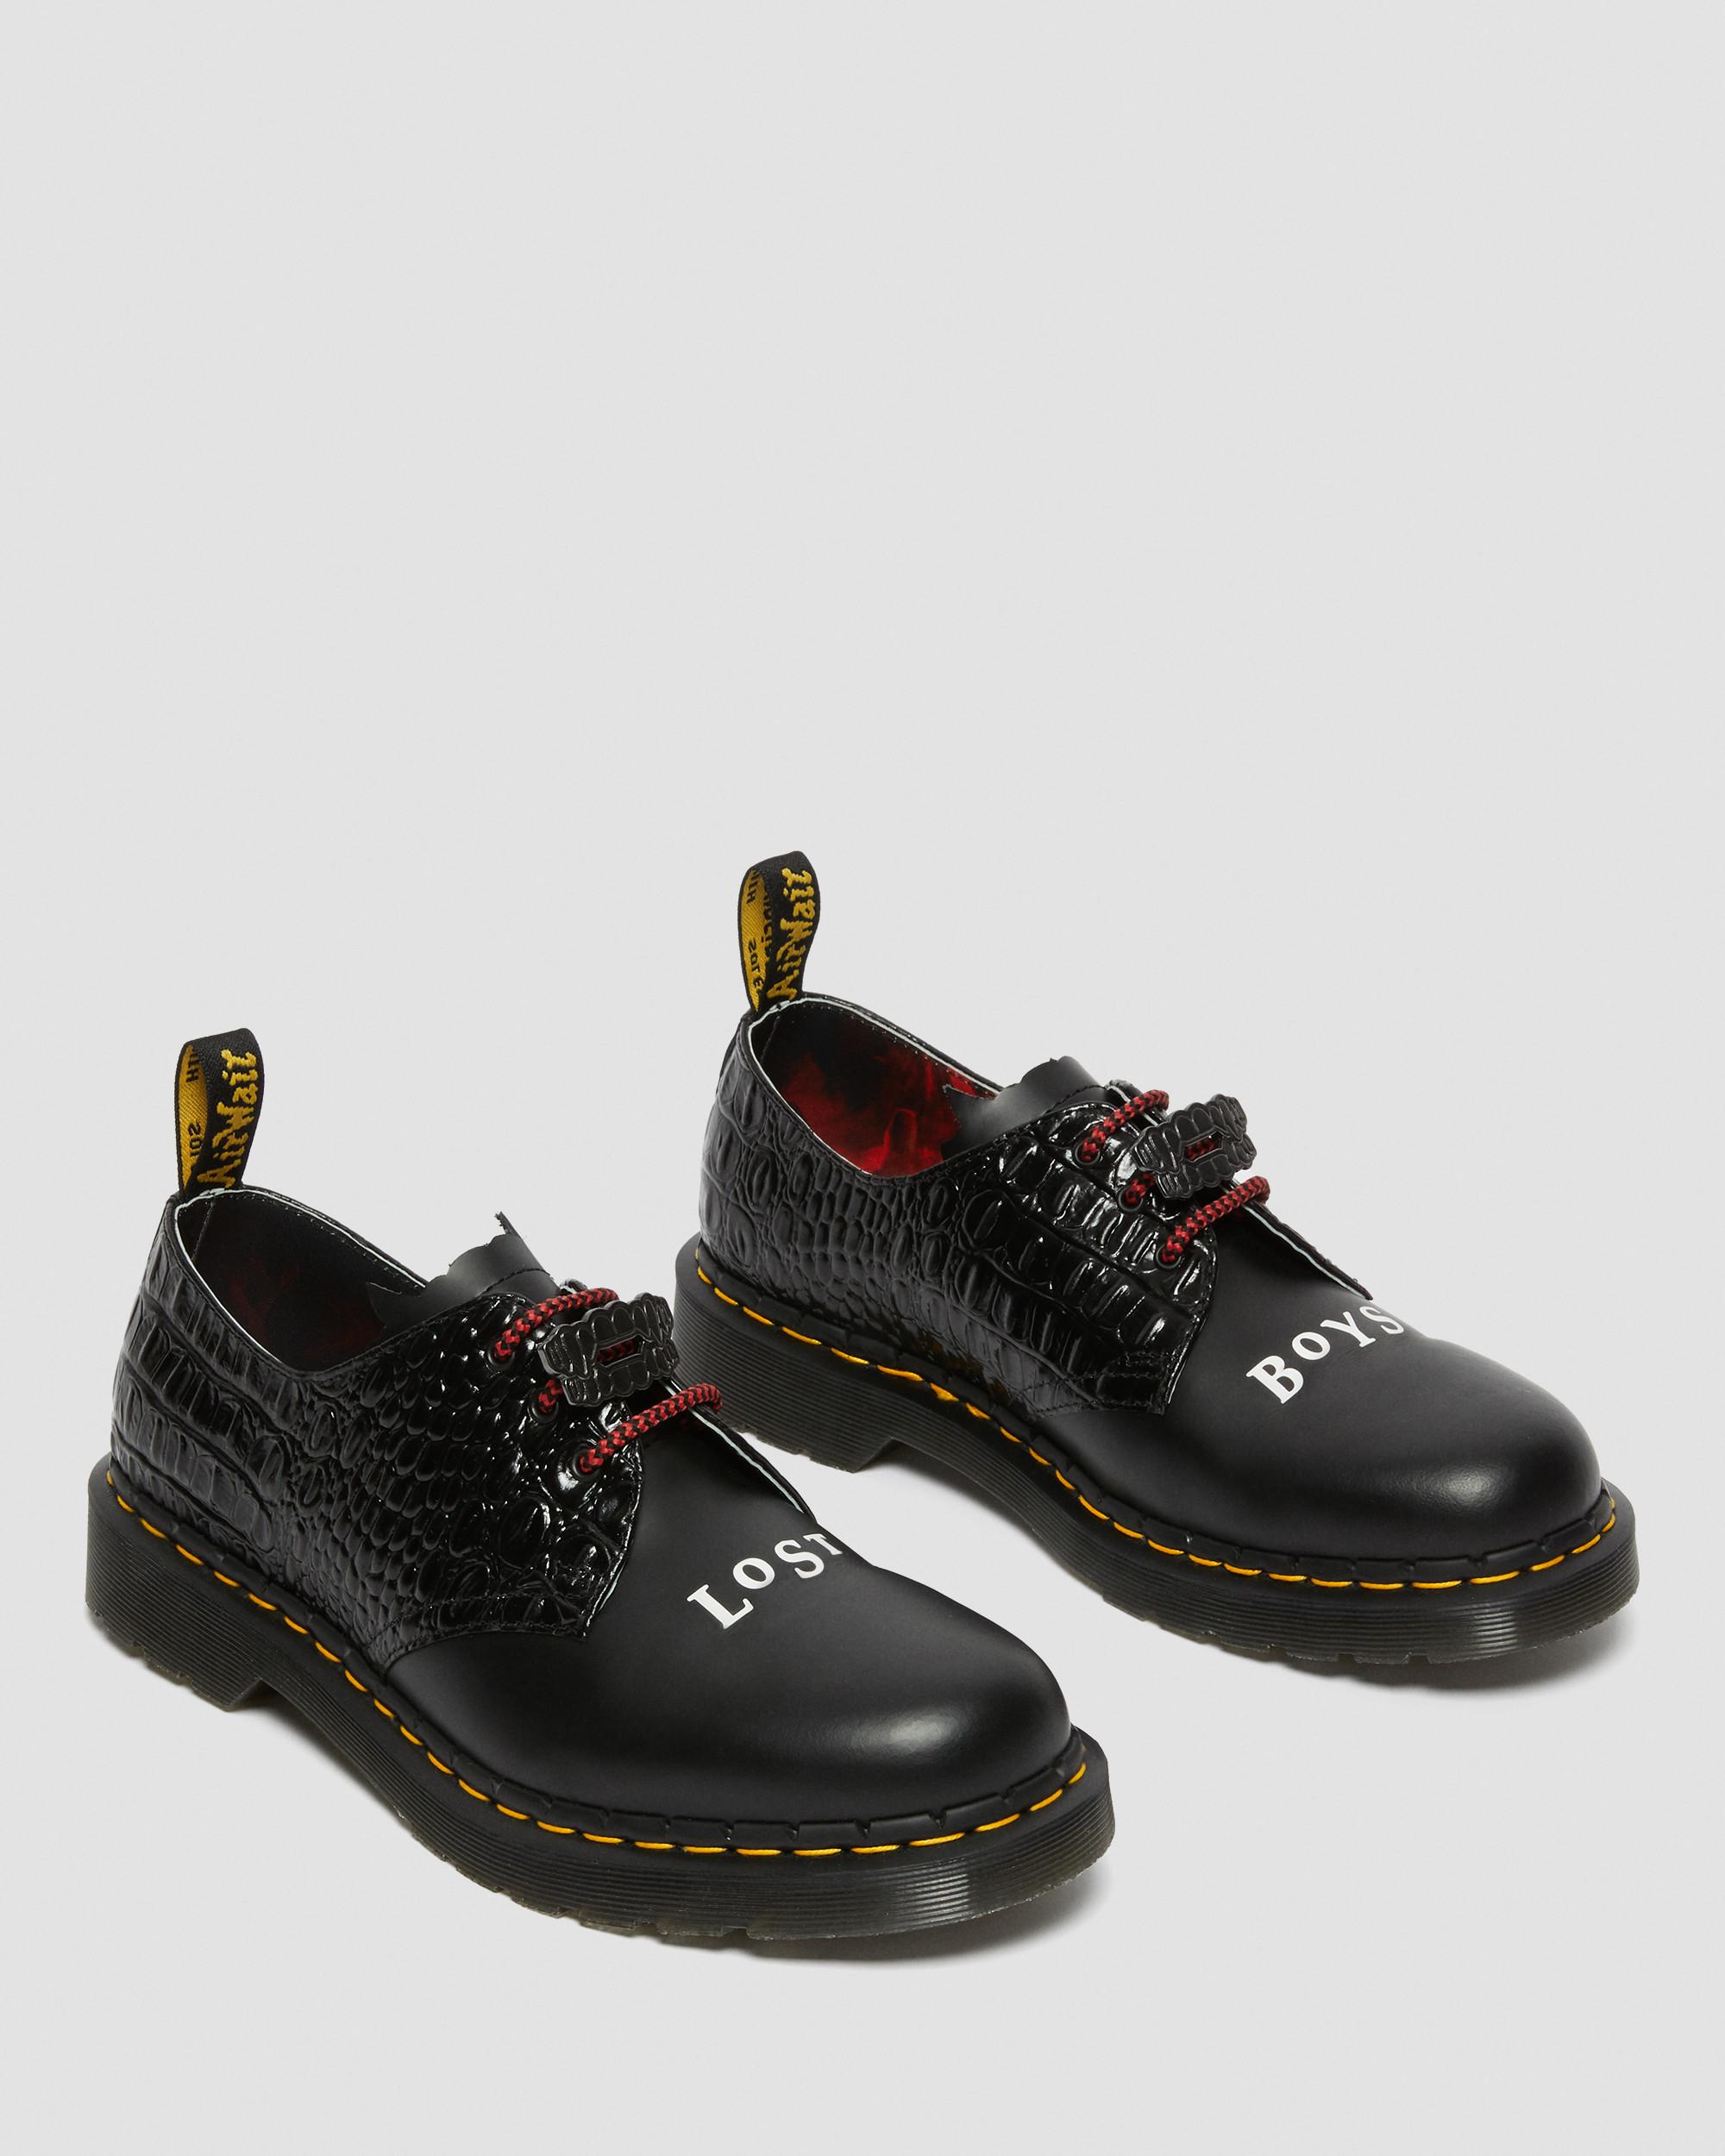 1461 WB Lost Boys Leather Oxford Shoes in Black | Dr. Martens